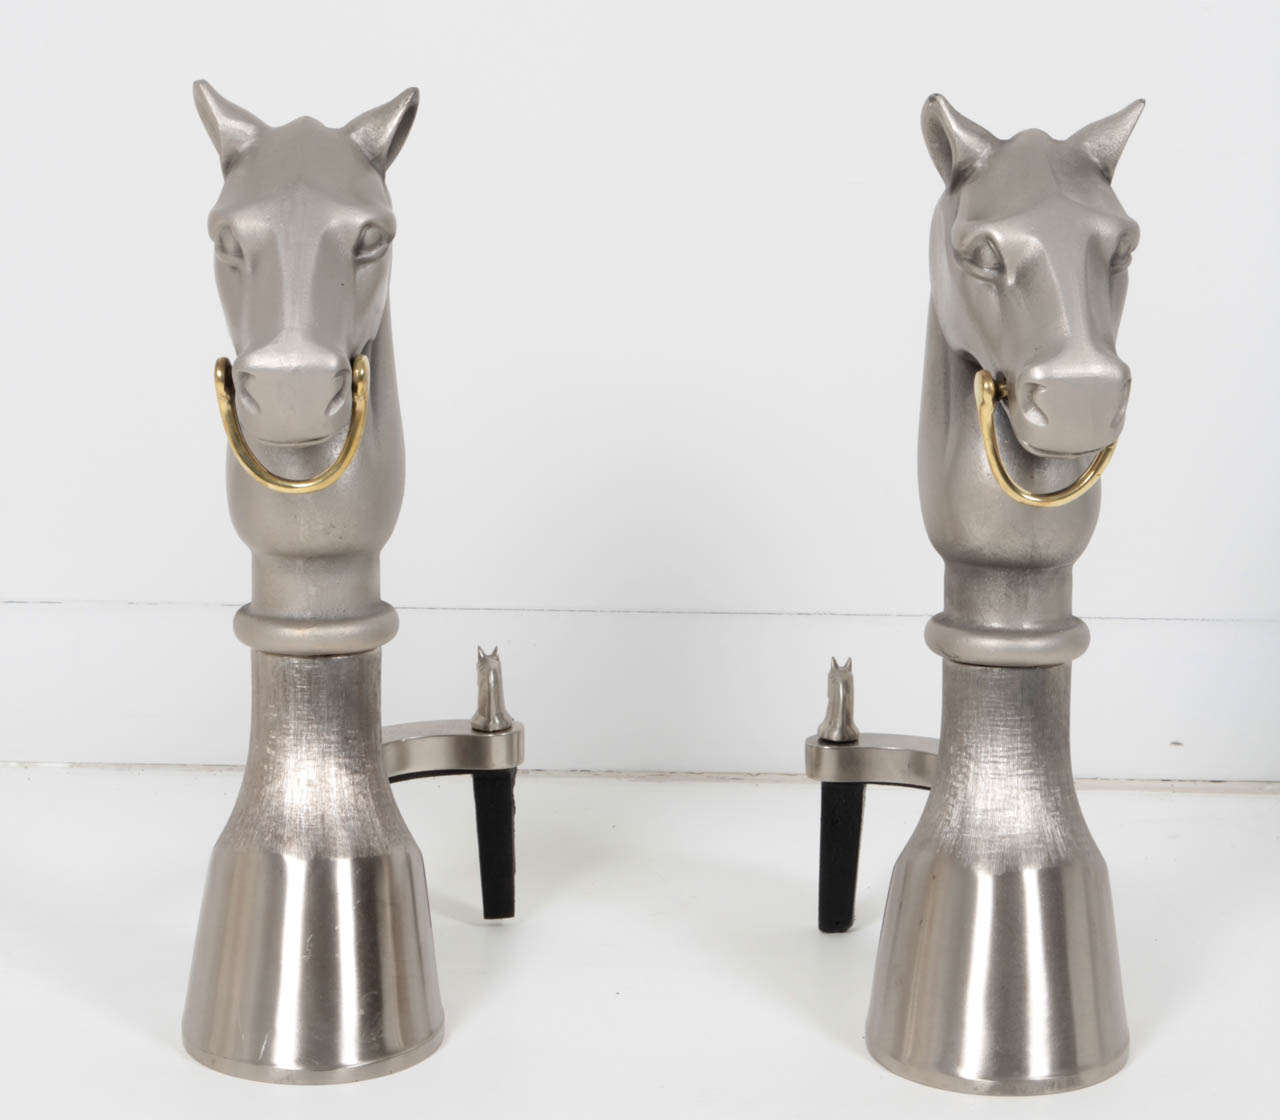 Fantastic pair of Hermes style satin nickel stylized horse andirons with a polished brass bit.